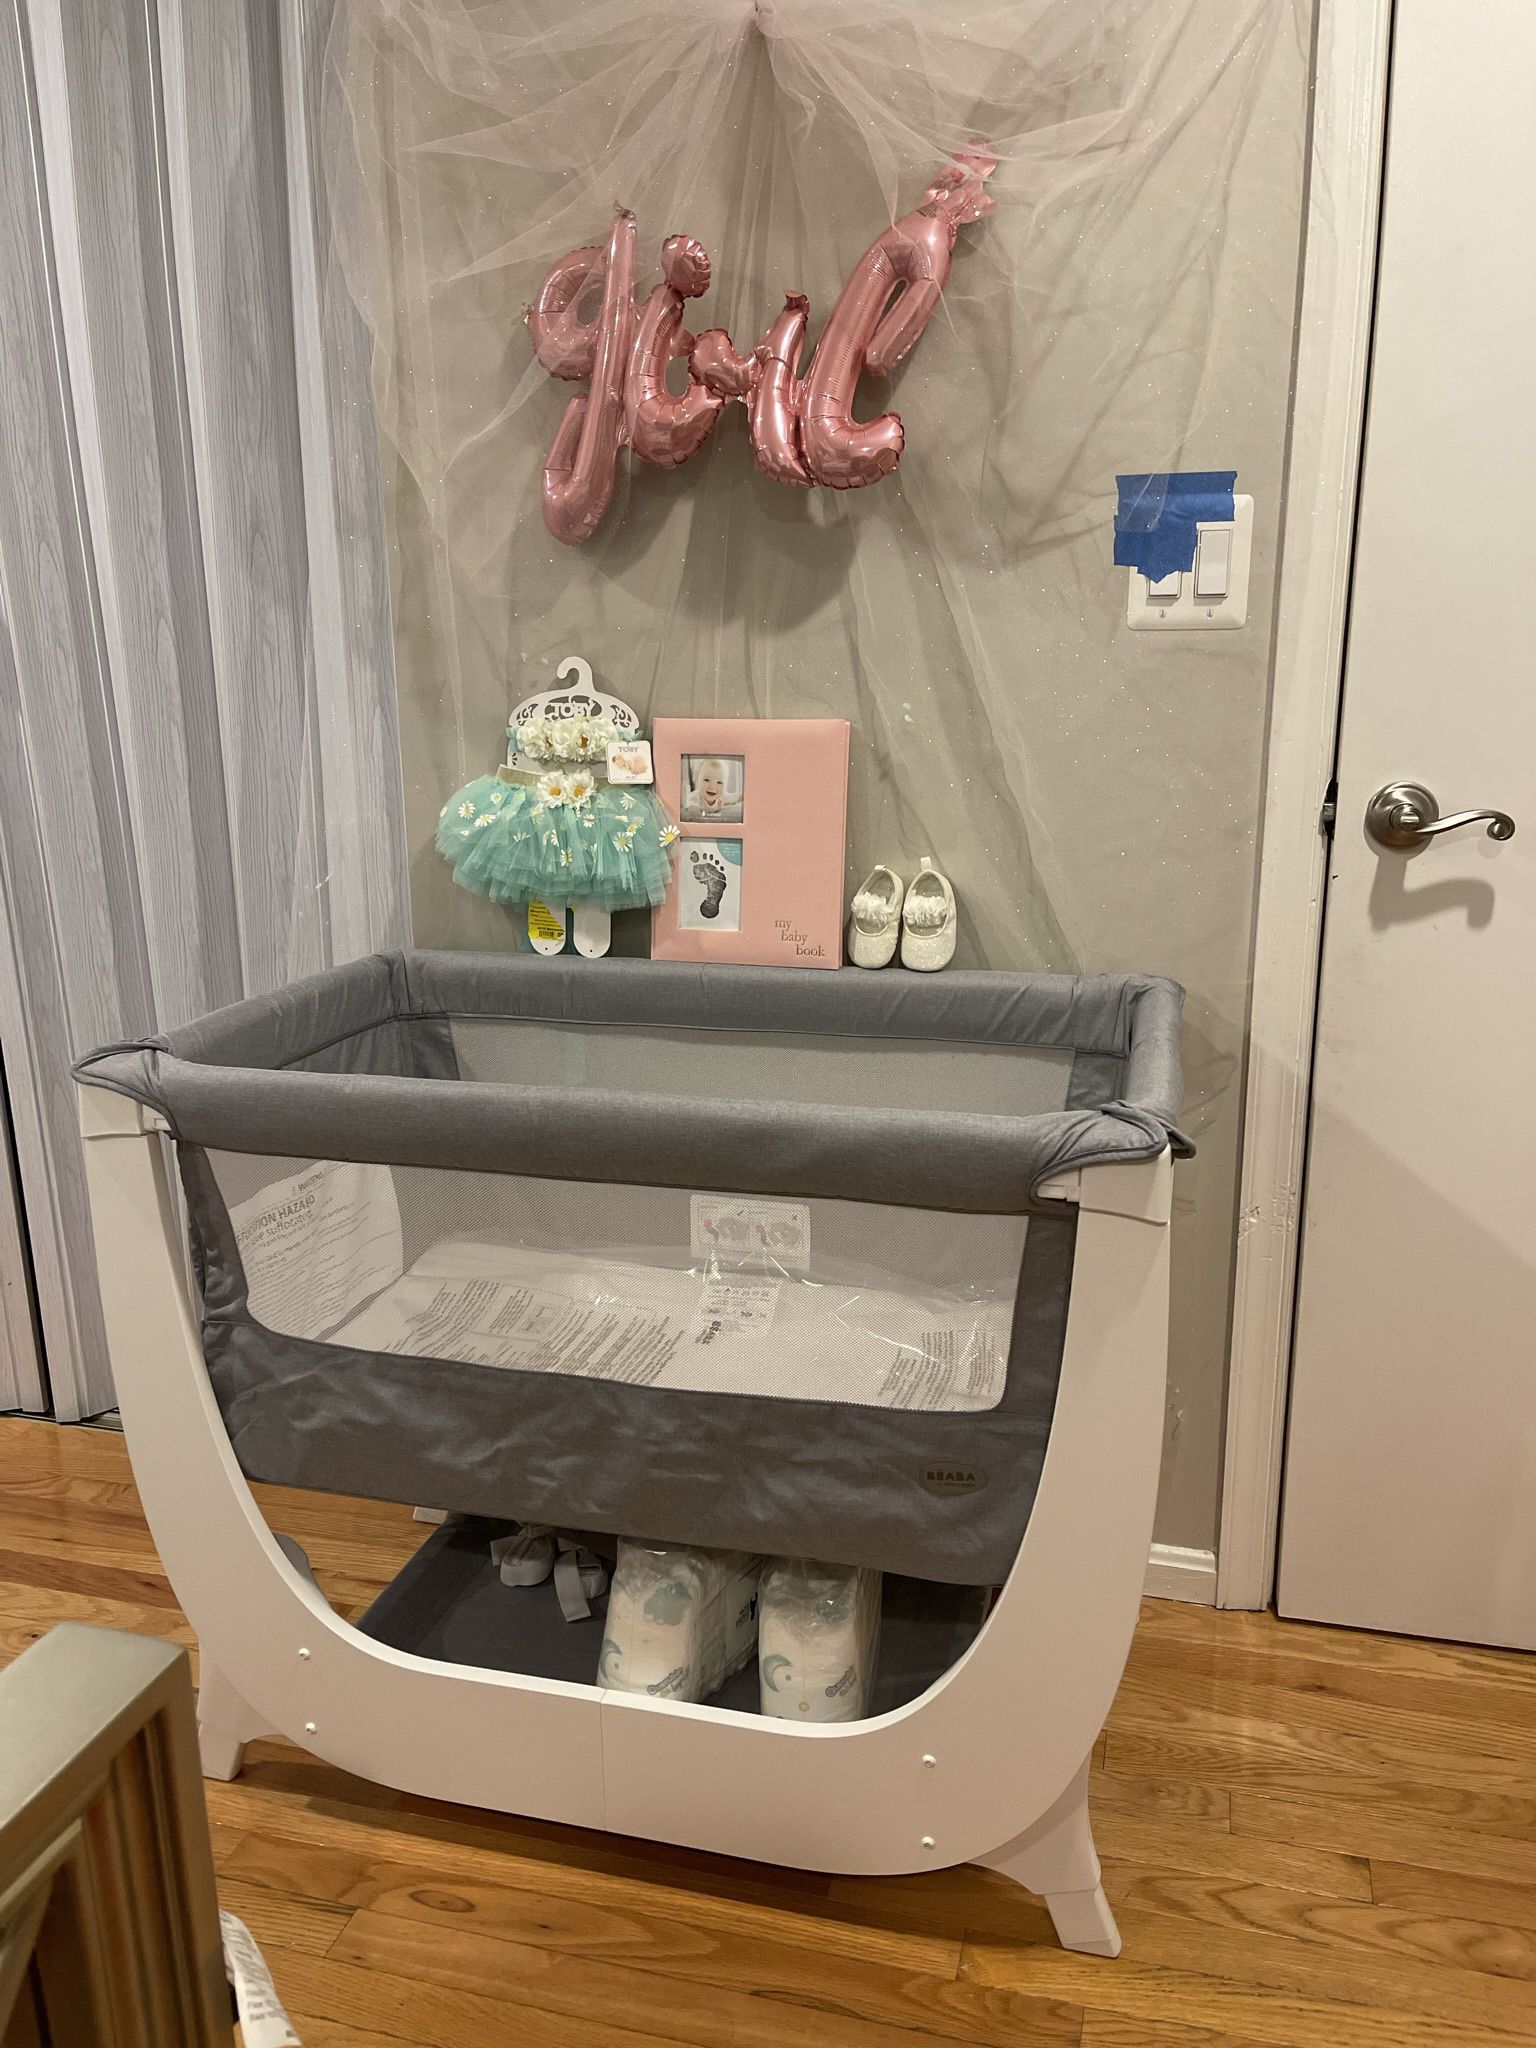 Beaba By Snuggle Convertible Air Bedside Bassinet I’m Dove Gray